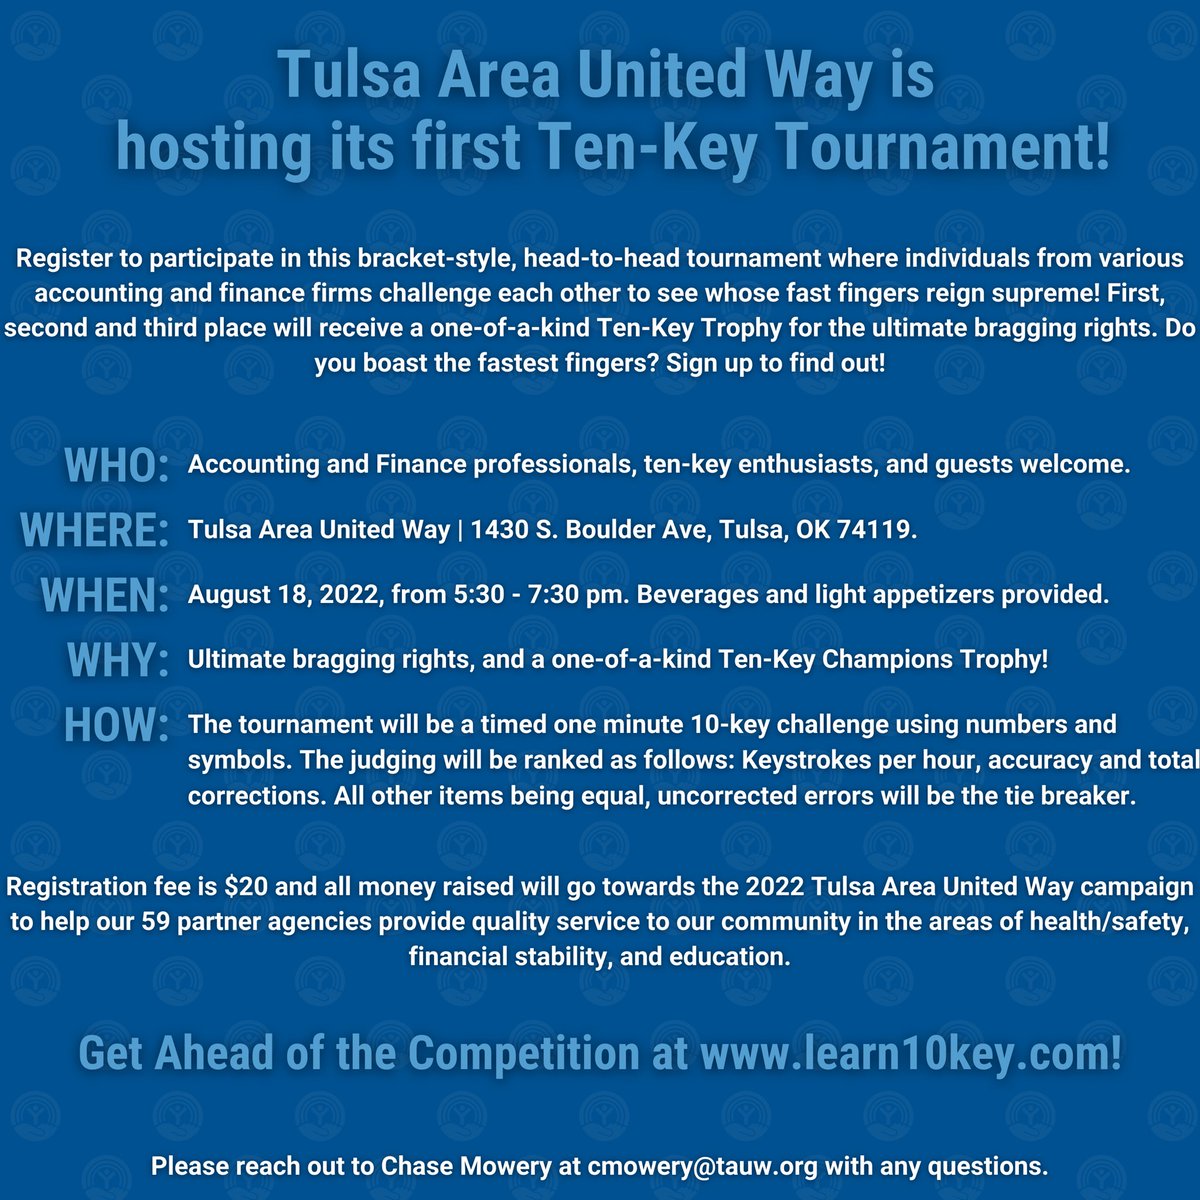 Join us for the FIRST Ten-Key Tournament on August 18 from 5:30-7:30pm - register here! give.tauw.org/comm/SpecialEv… Compete head-to-head with other accounting, finance and ten-key extraordinaries to win bragging rights and a one-of-a-kind Ten-Key Trophy. We hope you can make it!